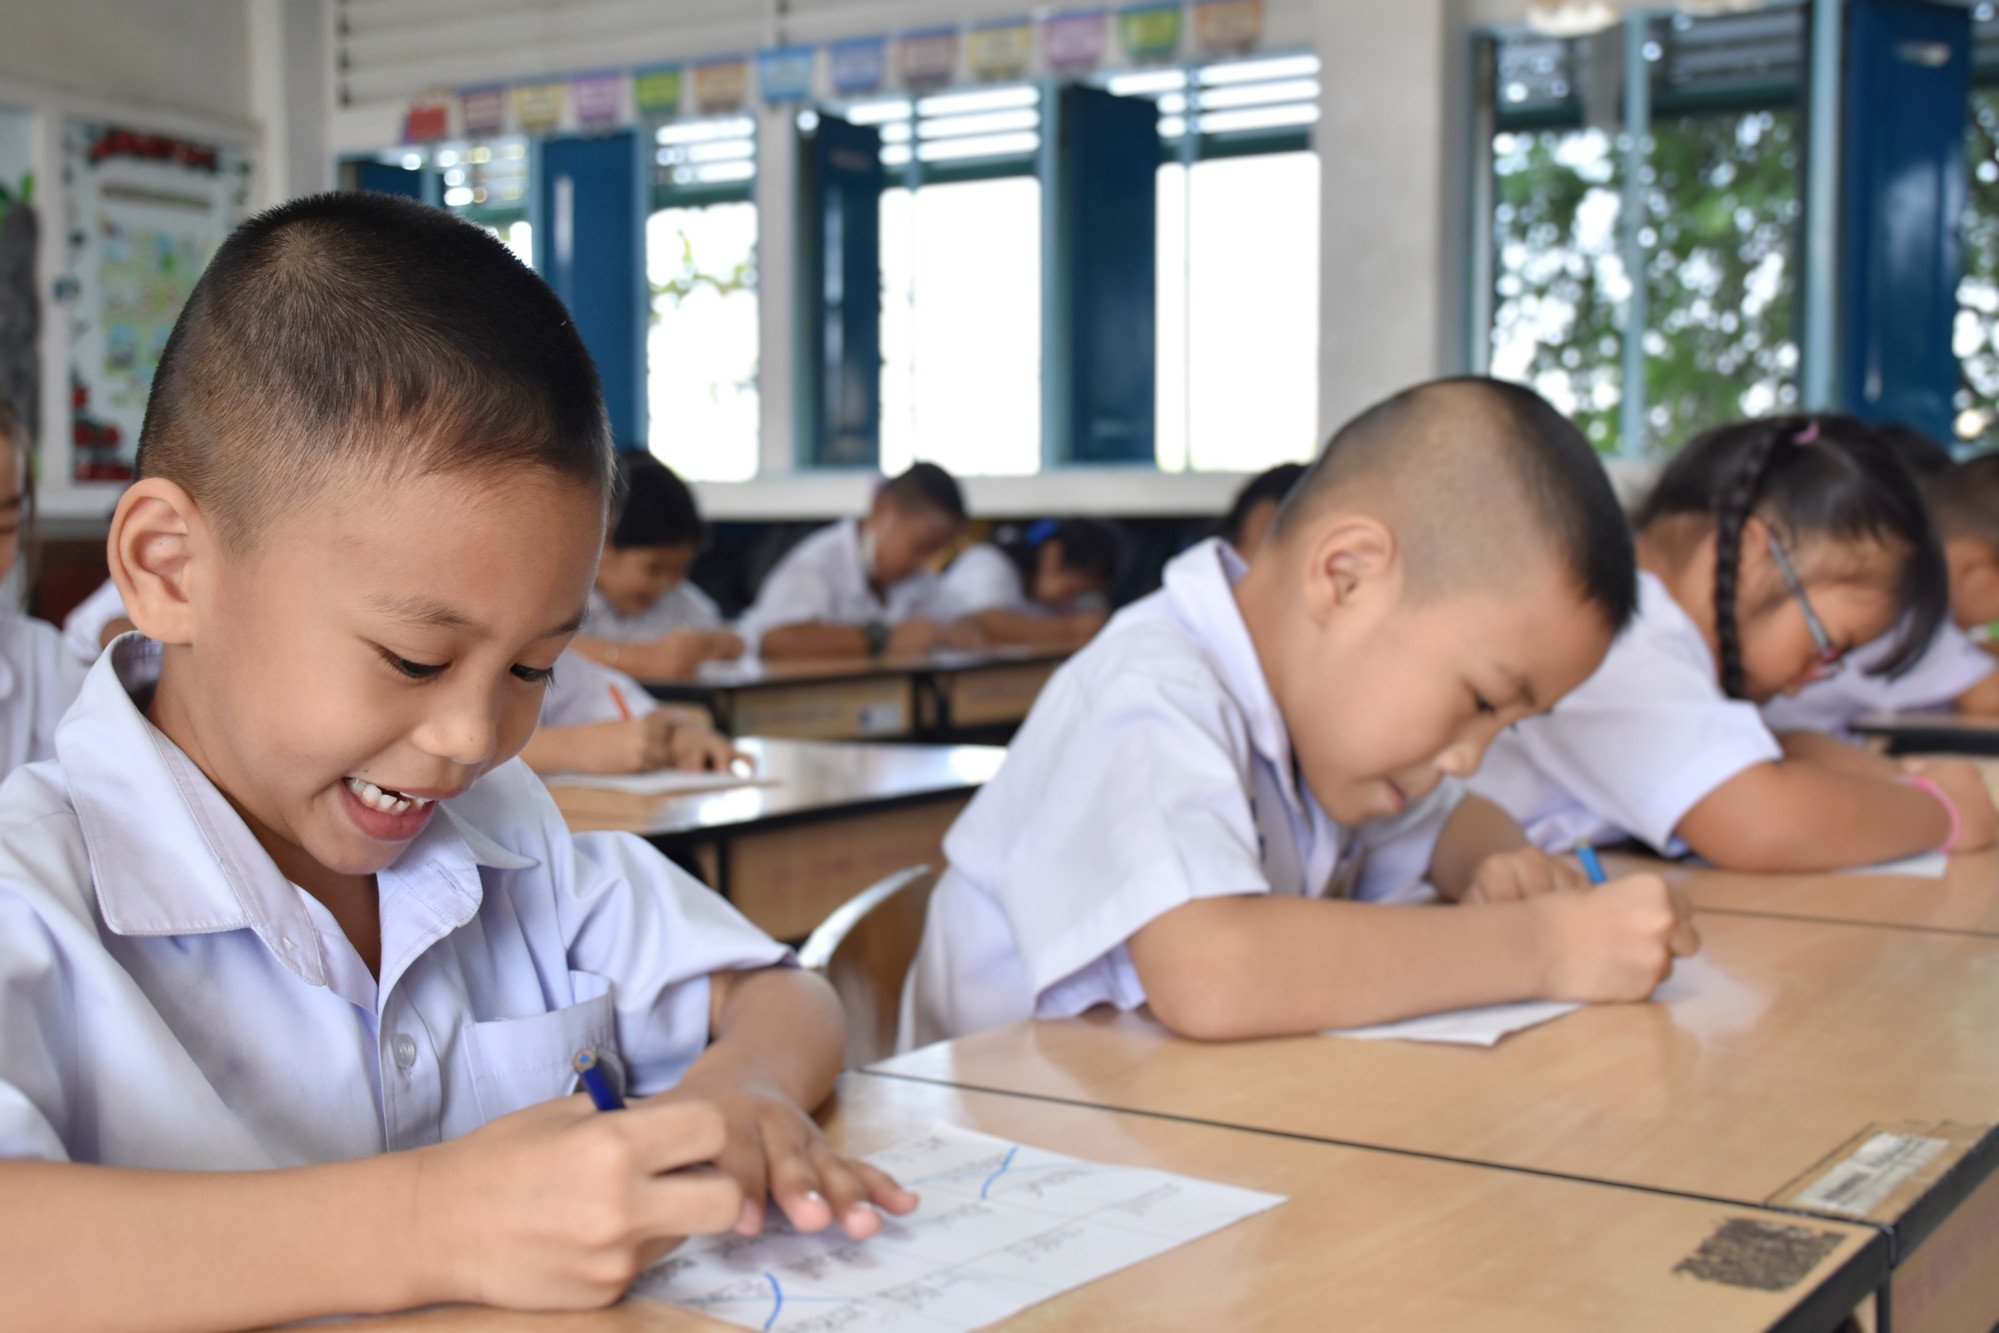 Stories about young children showing maturity are not uncommon across Asia. Photo: Shutterstock